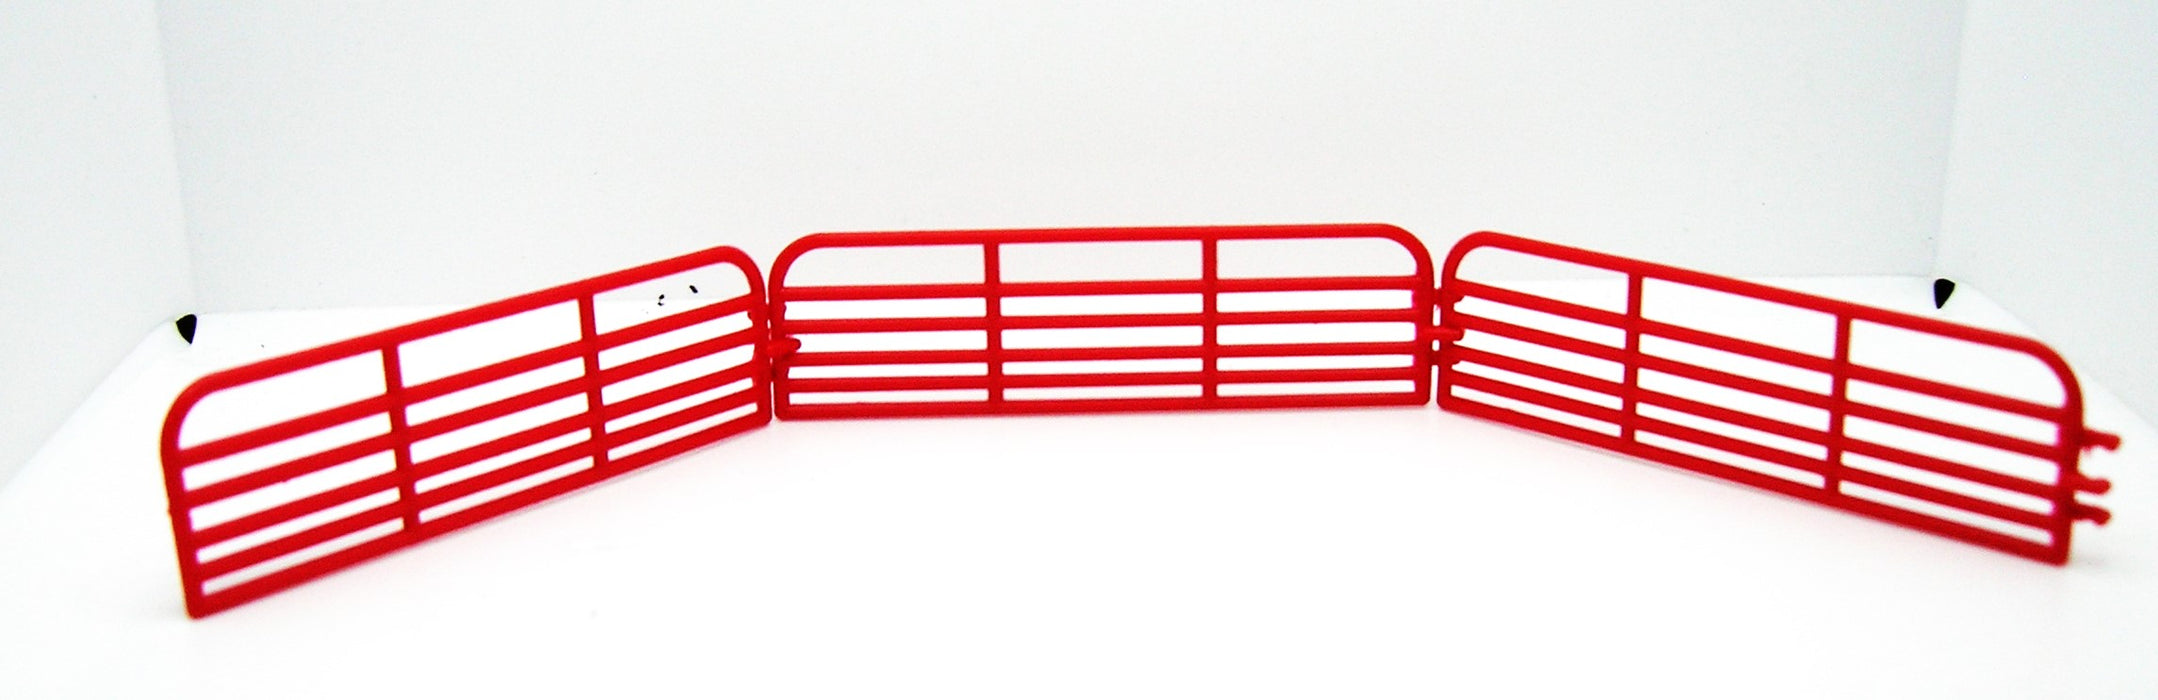 1/64 STANDI TOYS 16FT CATTLE GATES RED 3PK